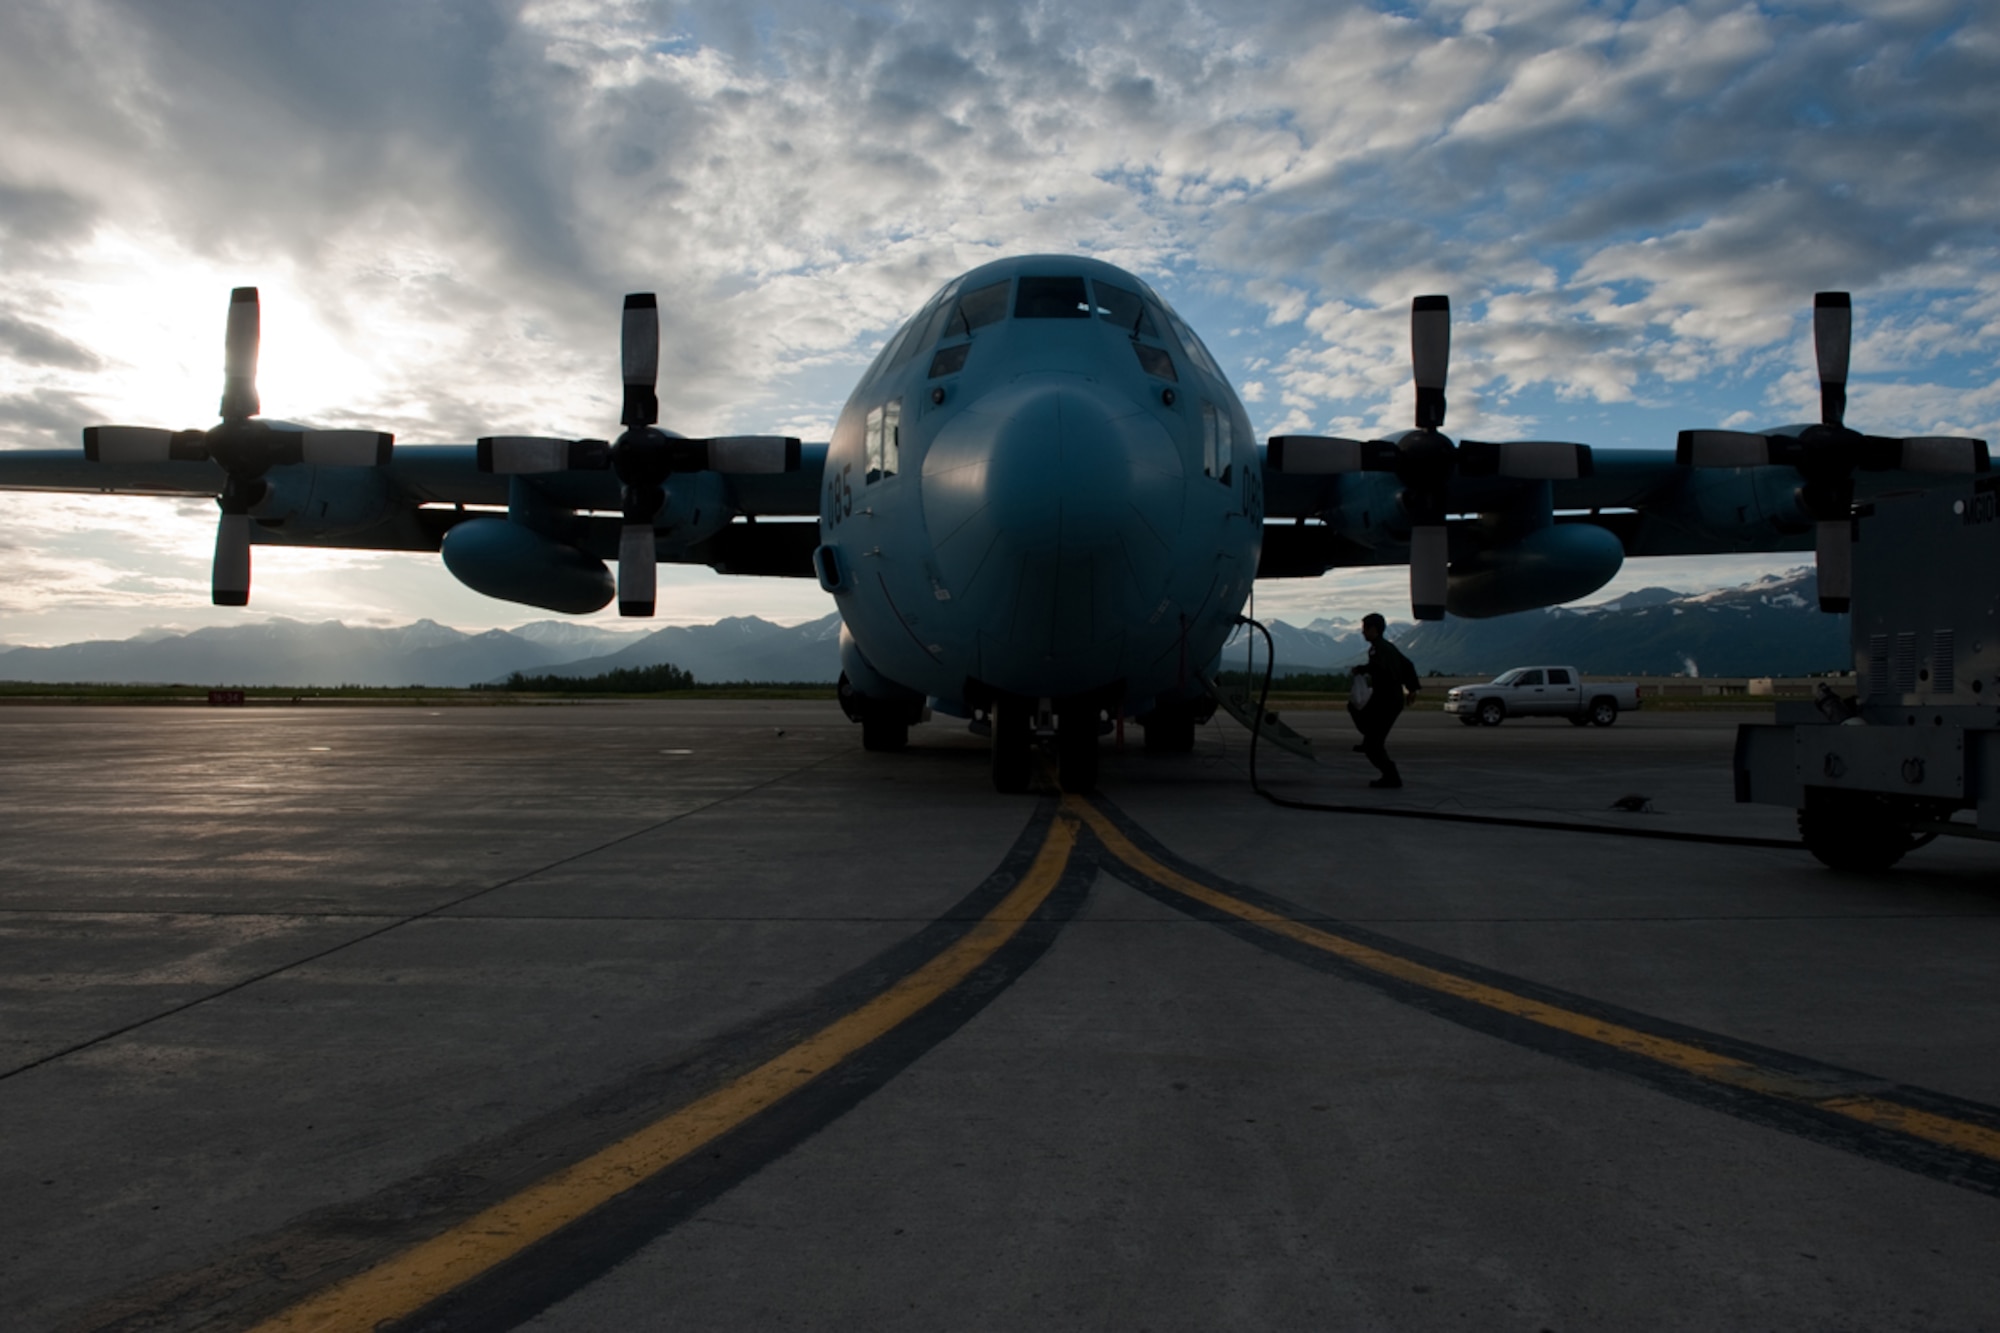 A member of the Japanese Air Self Defense Force performs pre-flight inspections while the Japanese C-130 Hercules recharges during Red Flag - Alaska on the flight line of Joint Base Elmendorf-Richardson, Alaska June 19. The C-130 Hercules offers a maximum speed of 600 kilometers an hour with a payload of 19,400 pounds and can be used for air drops. Red-Flag Alaska is designed to strengthen bilateral ties between nations and offers the JASDF the opportunity to improve aerial tactics. (U.S. Air Force photo/Staff Sgt. Robert Barnett)